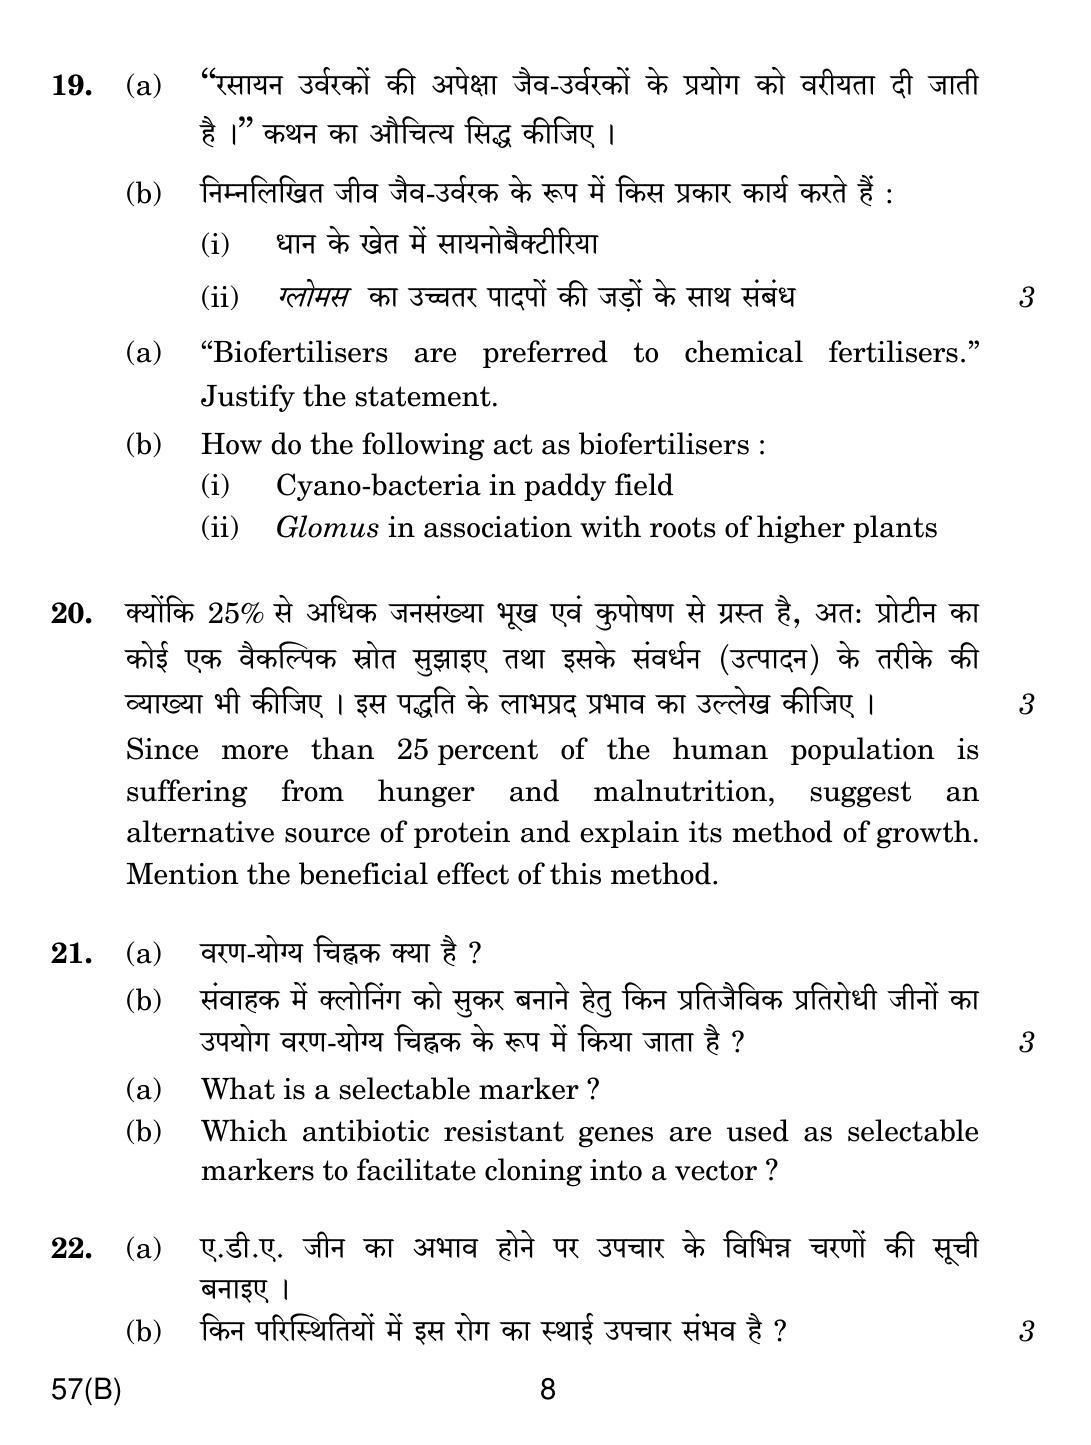 CBSE Class 12 57(B) Biology For Blind 2019 Question Paper - Page 8